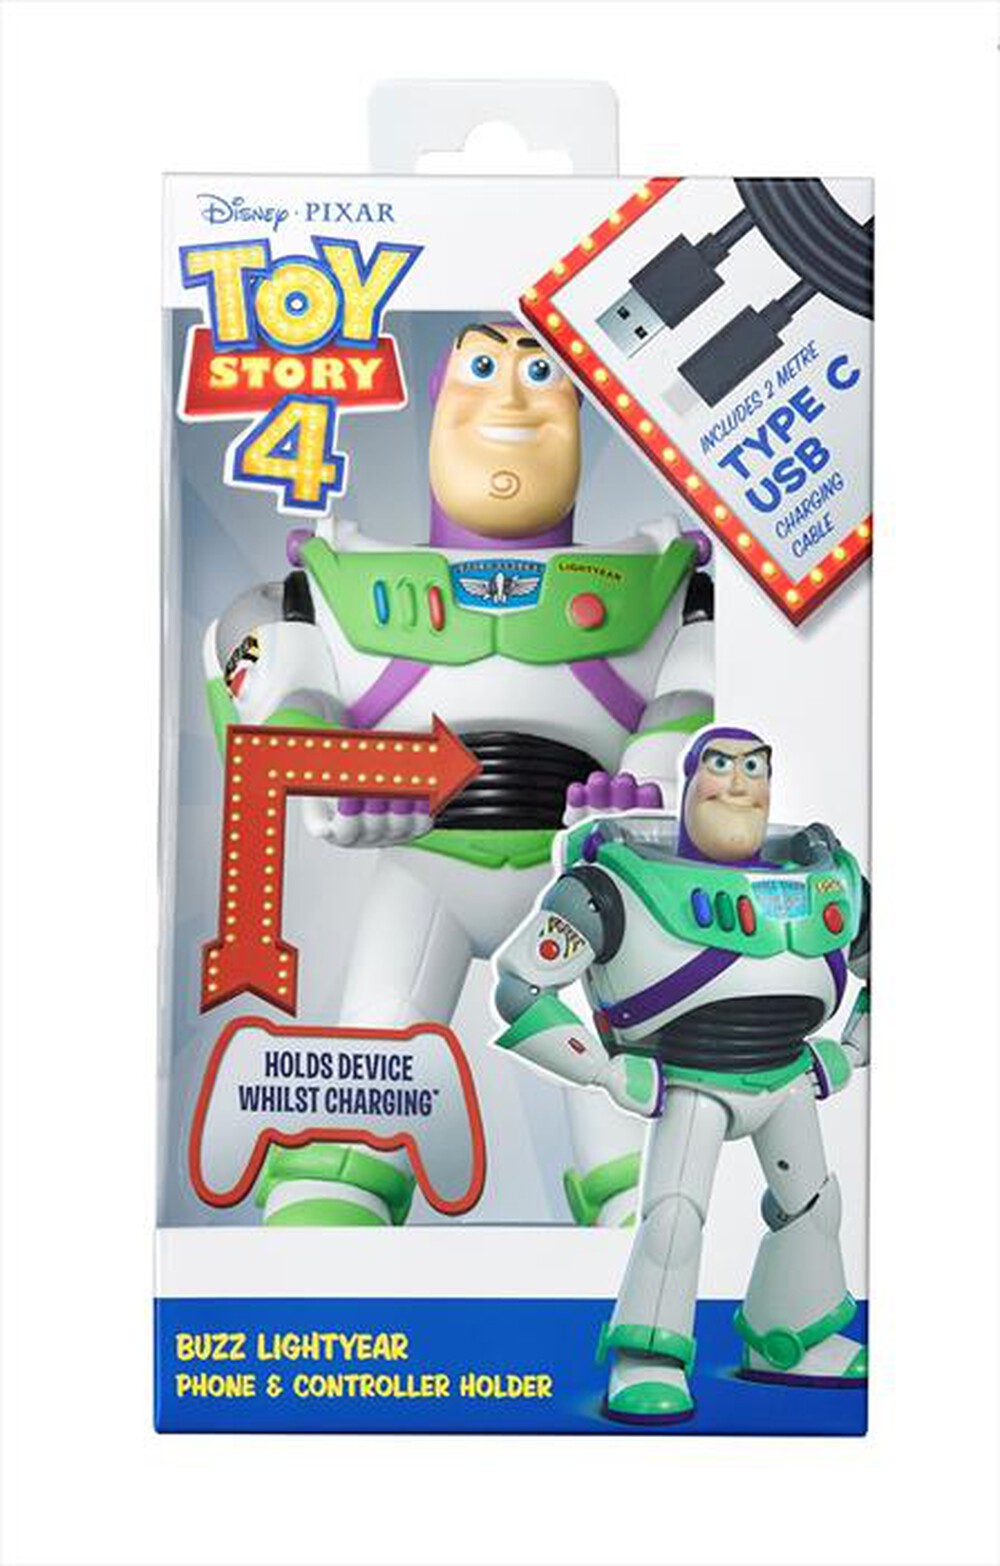 "EXQUISITE GAMING - BUZZ LIGHTYEAR CABLE GUY"